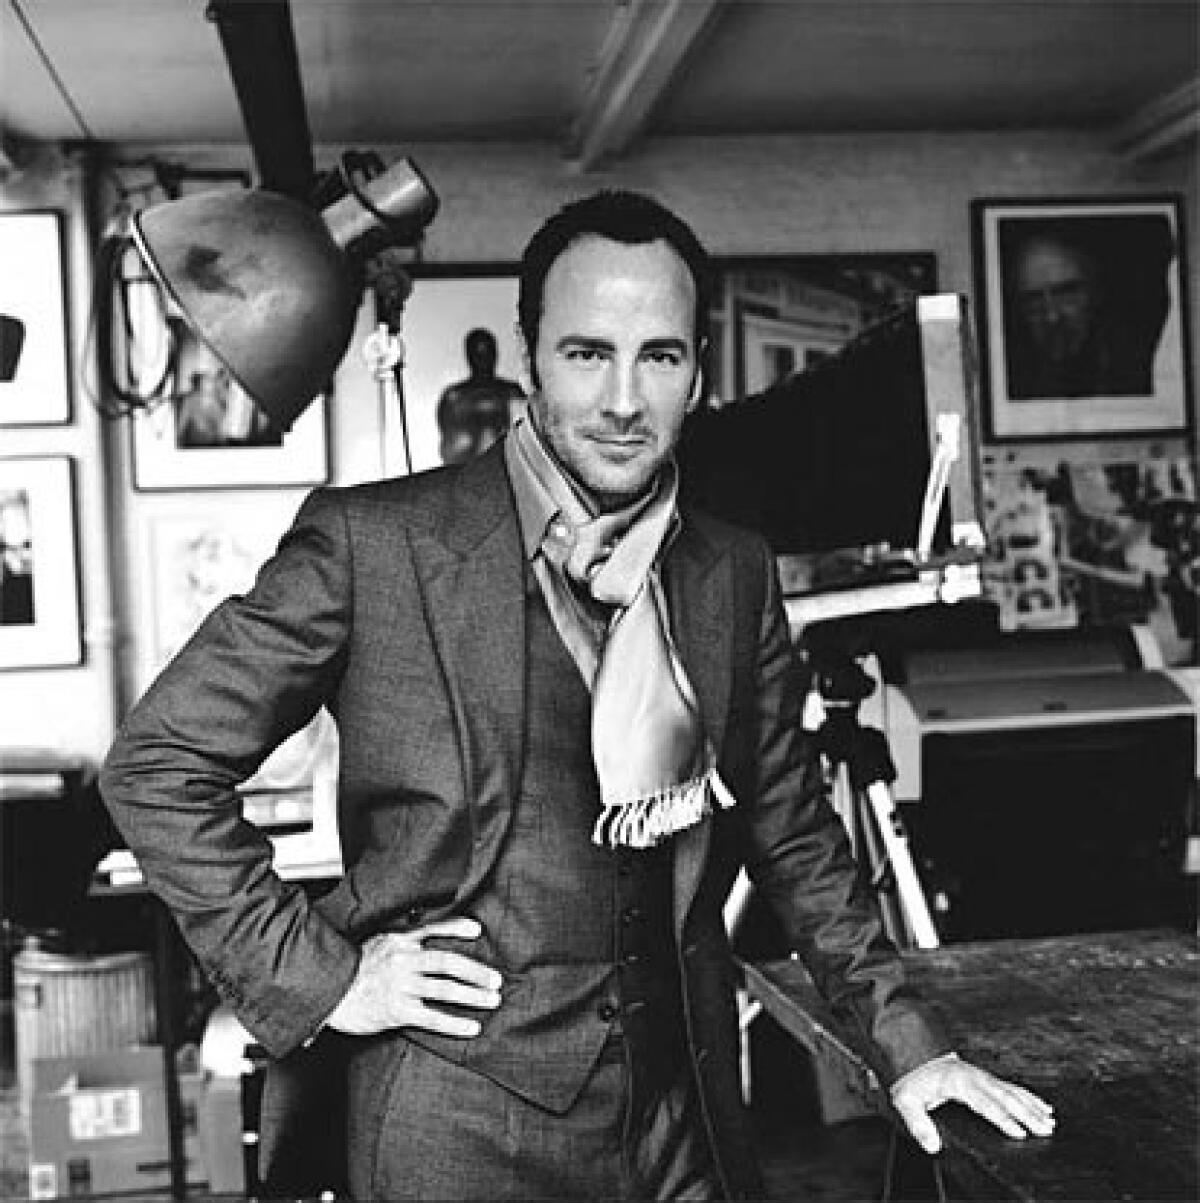 Designer Tom Ford is back with a men's wear line of luxurious suits and sportswear.